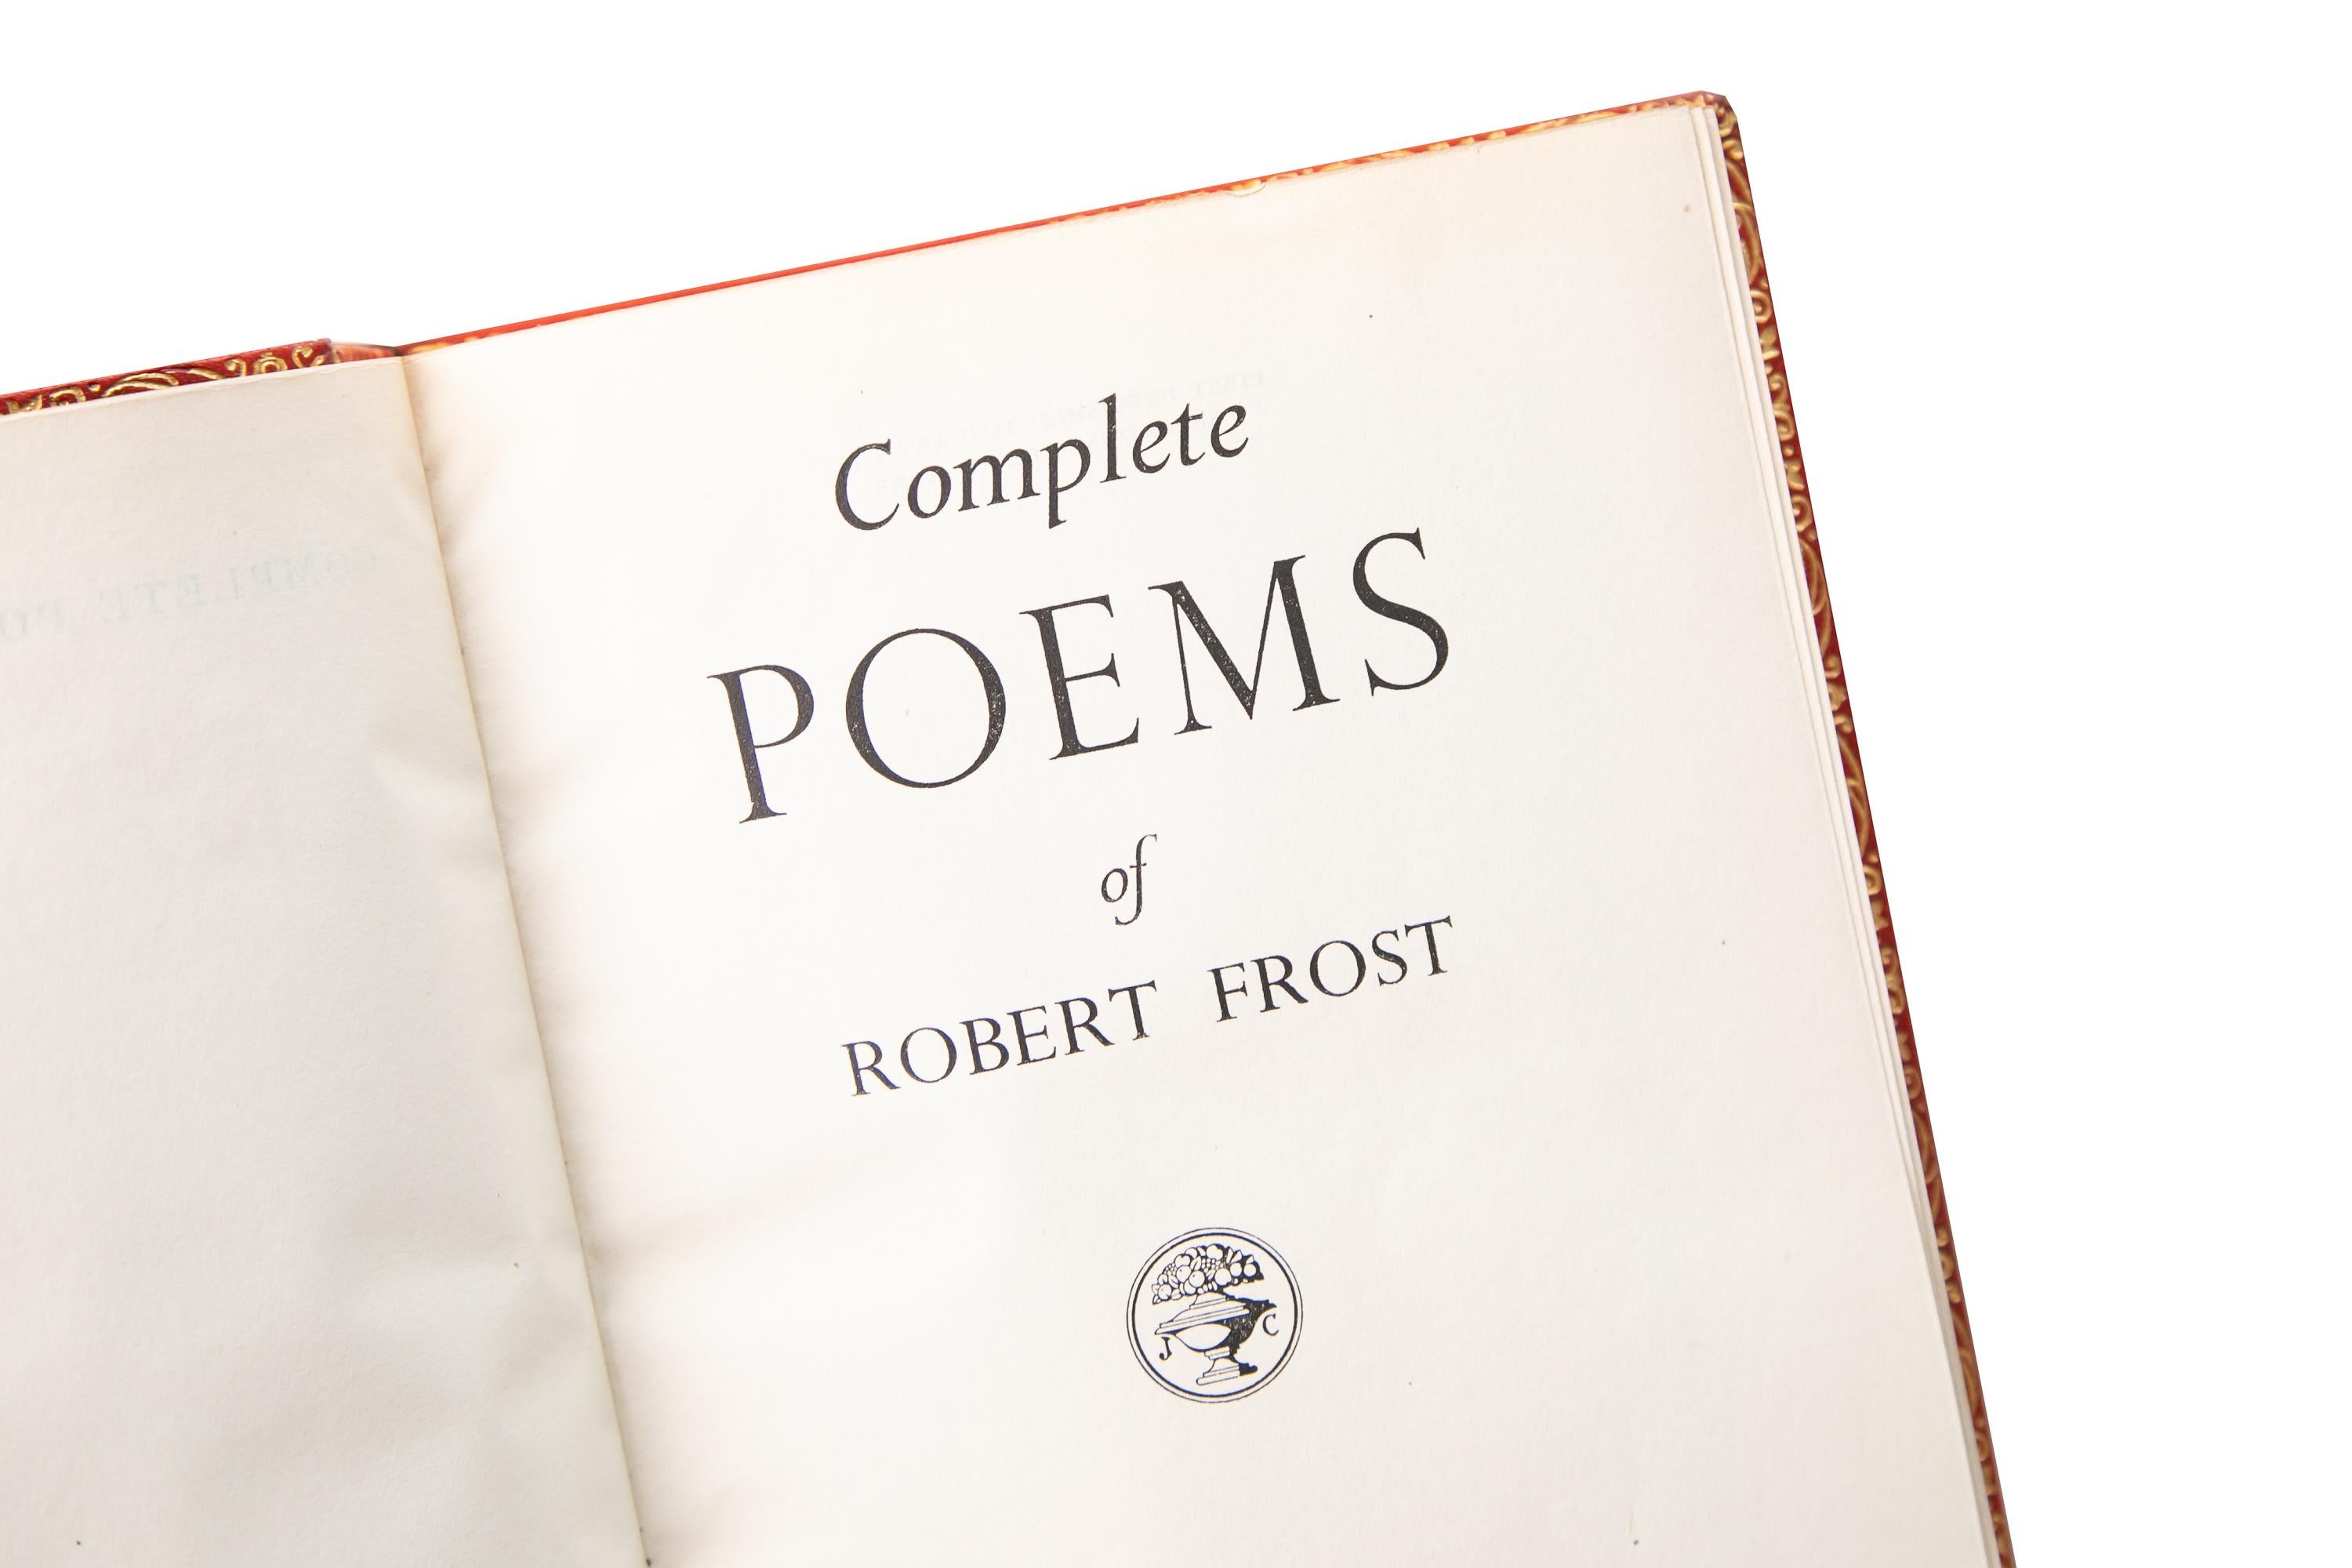 English 1 Volume, Robert Frost, the Complete Poems